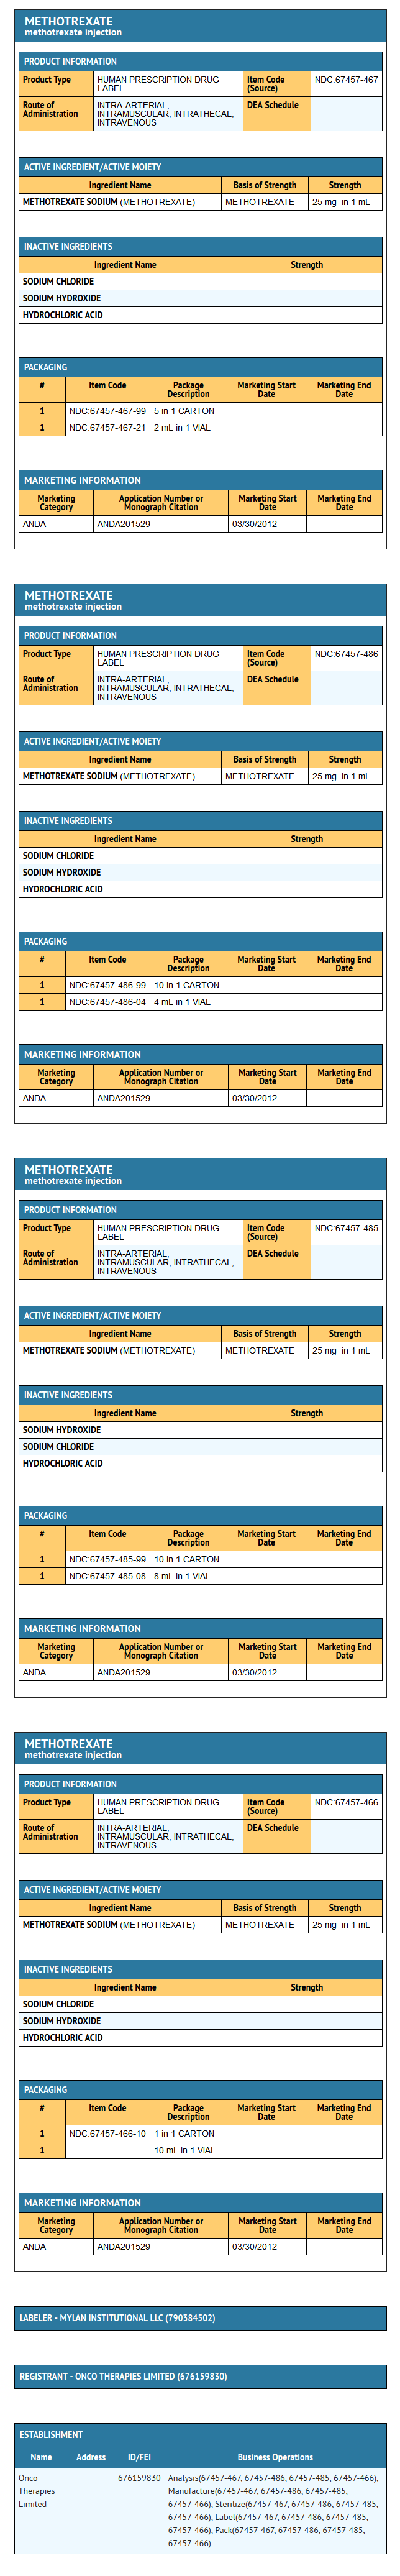 File:Methotrexate label.png